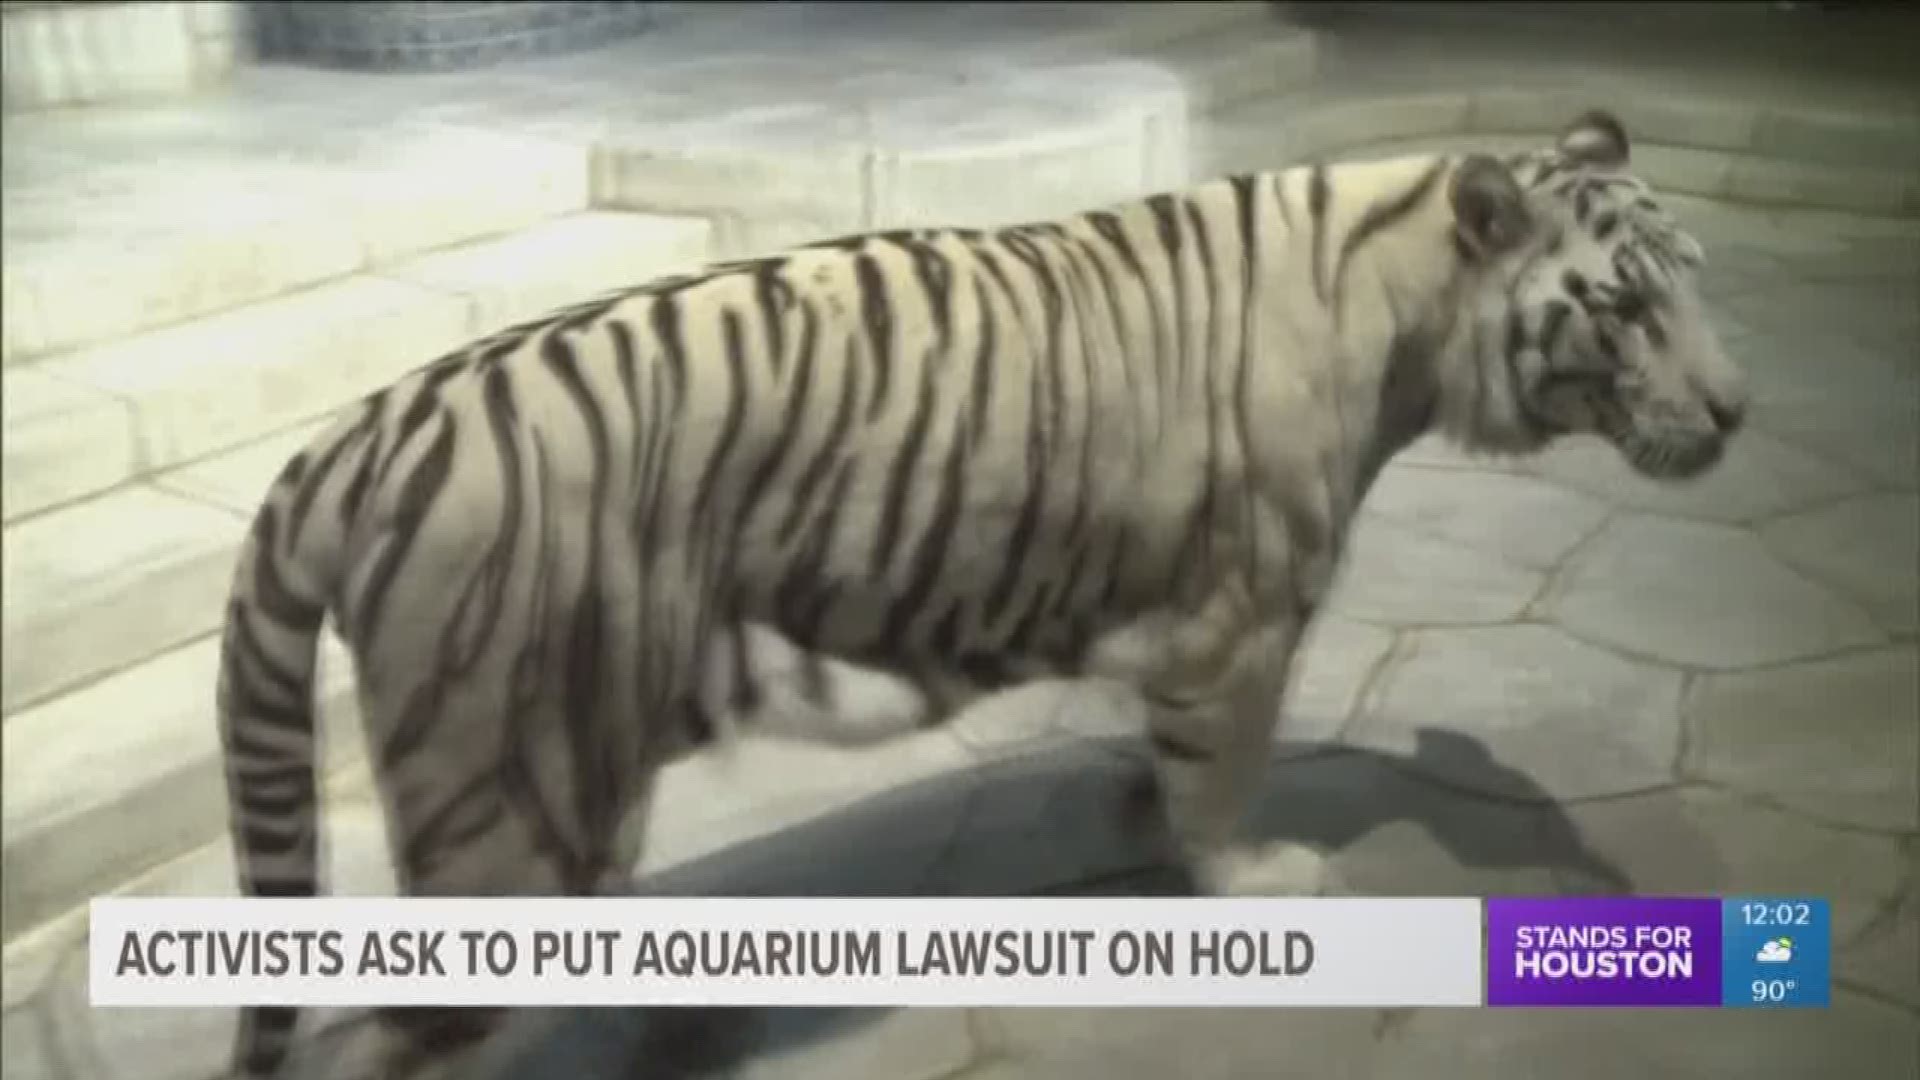 Animal Legal Defense Fund says they have decided to put their lawsuit against the Downtown Aquarium on hold for 120 days. They had sued the aquarium over its white tigers and their enclosure.